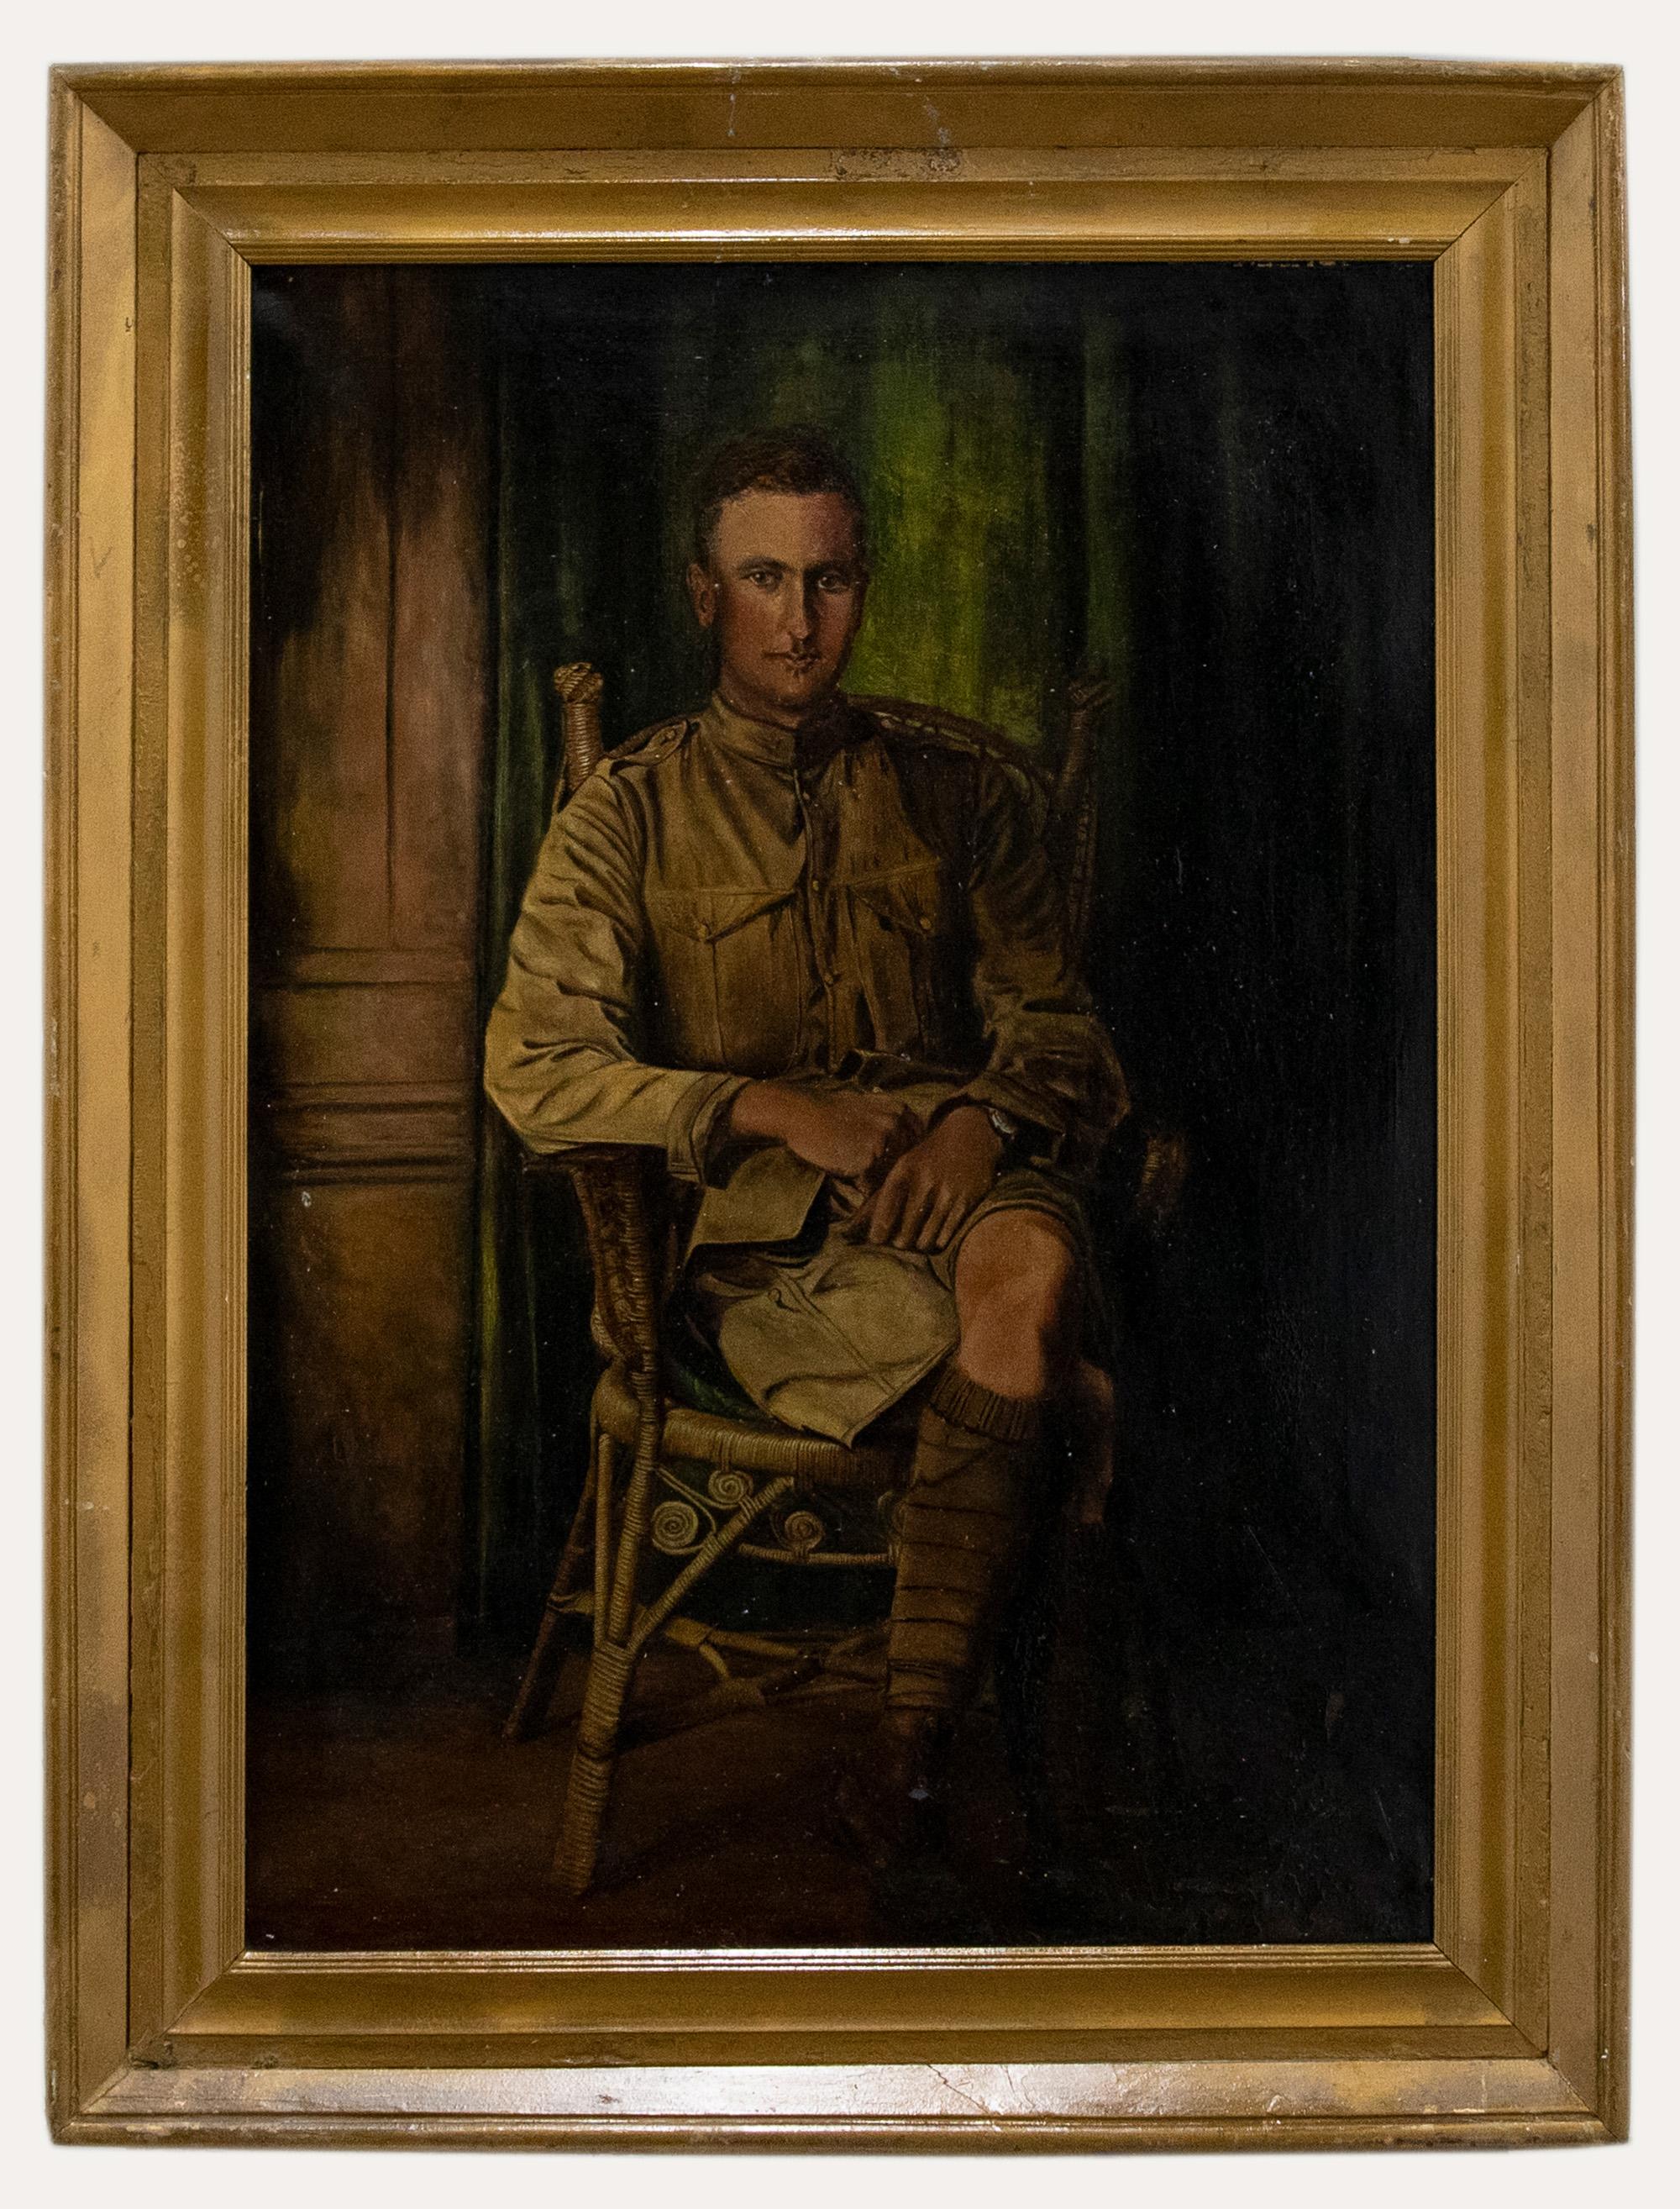 Unknown Portrait Painting - Framed Early 20th Century Oil - Portrait of a British Soldier